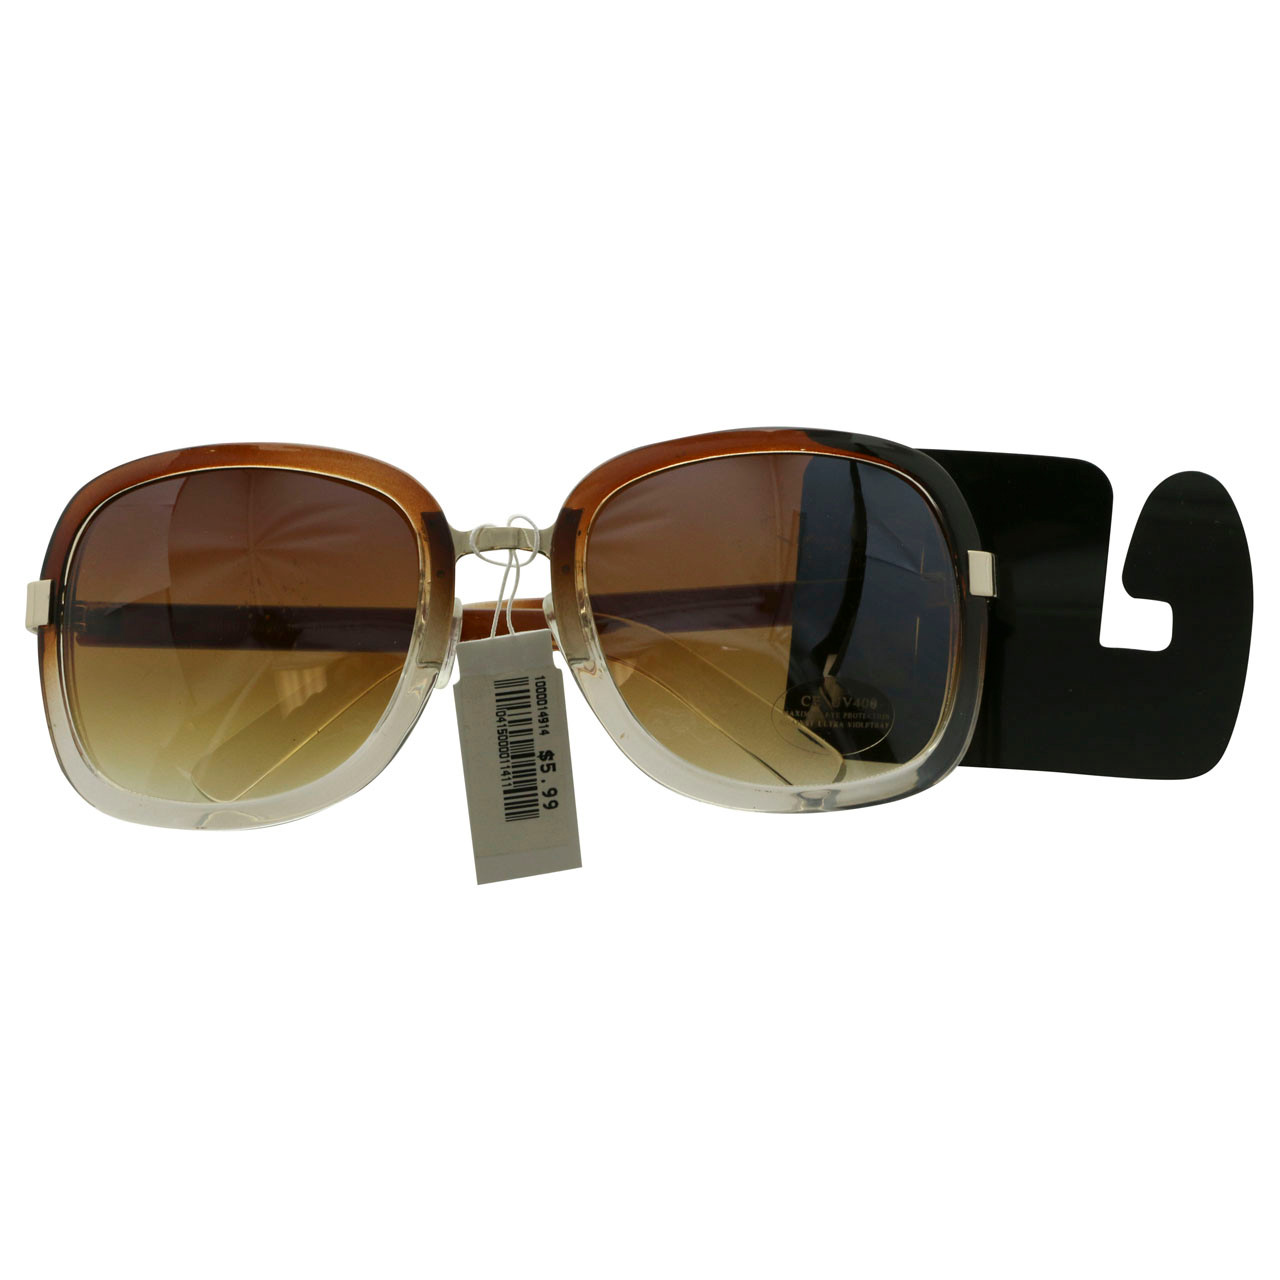 Uv400 Rectangular Frame Brown And Clear Sunglasses 12sg8630 Wholesale 